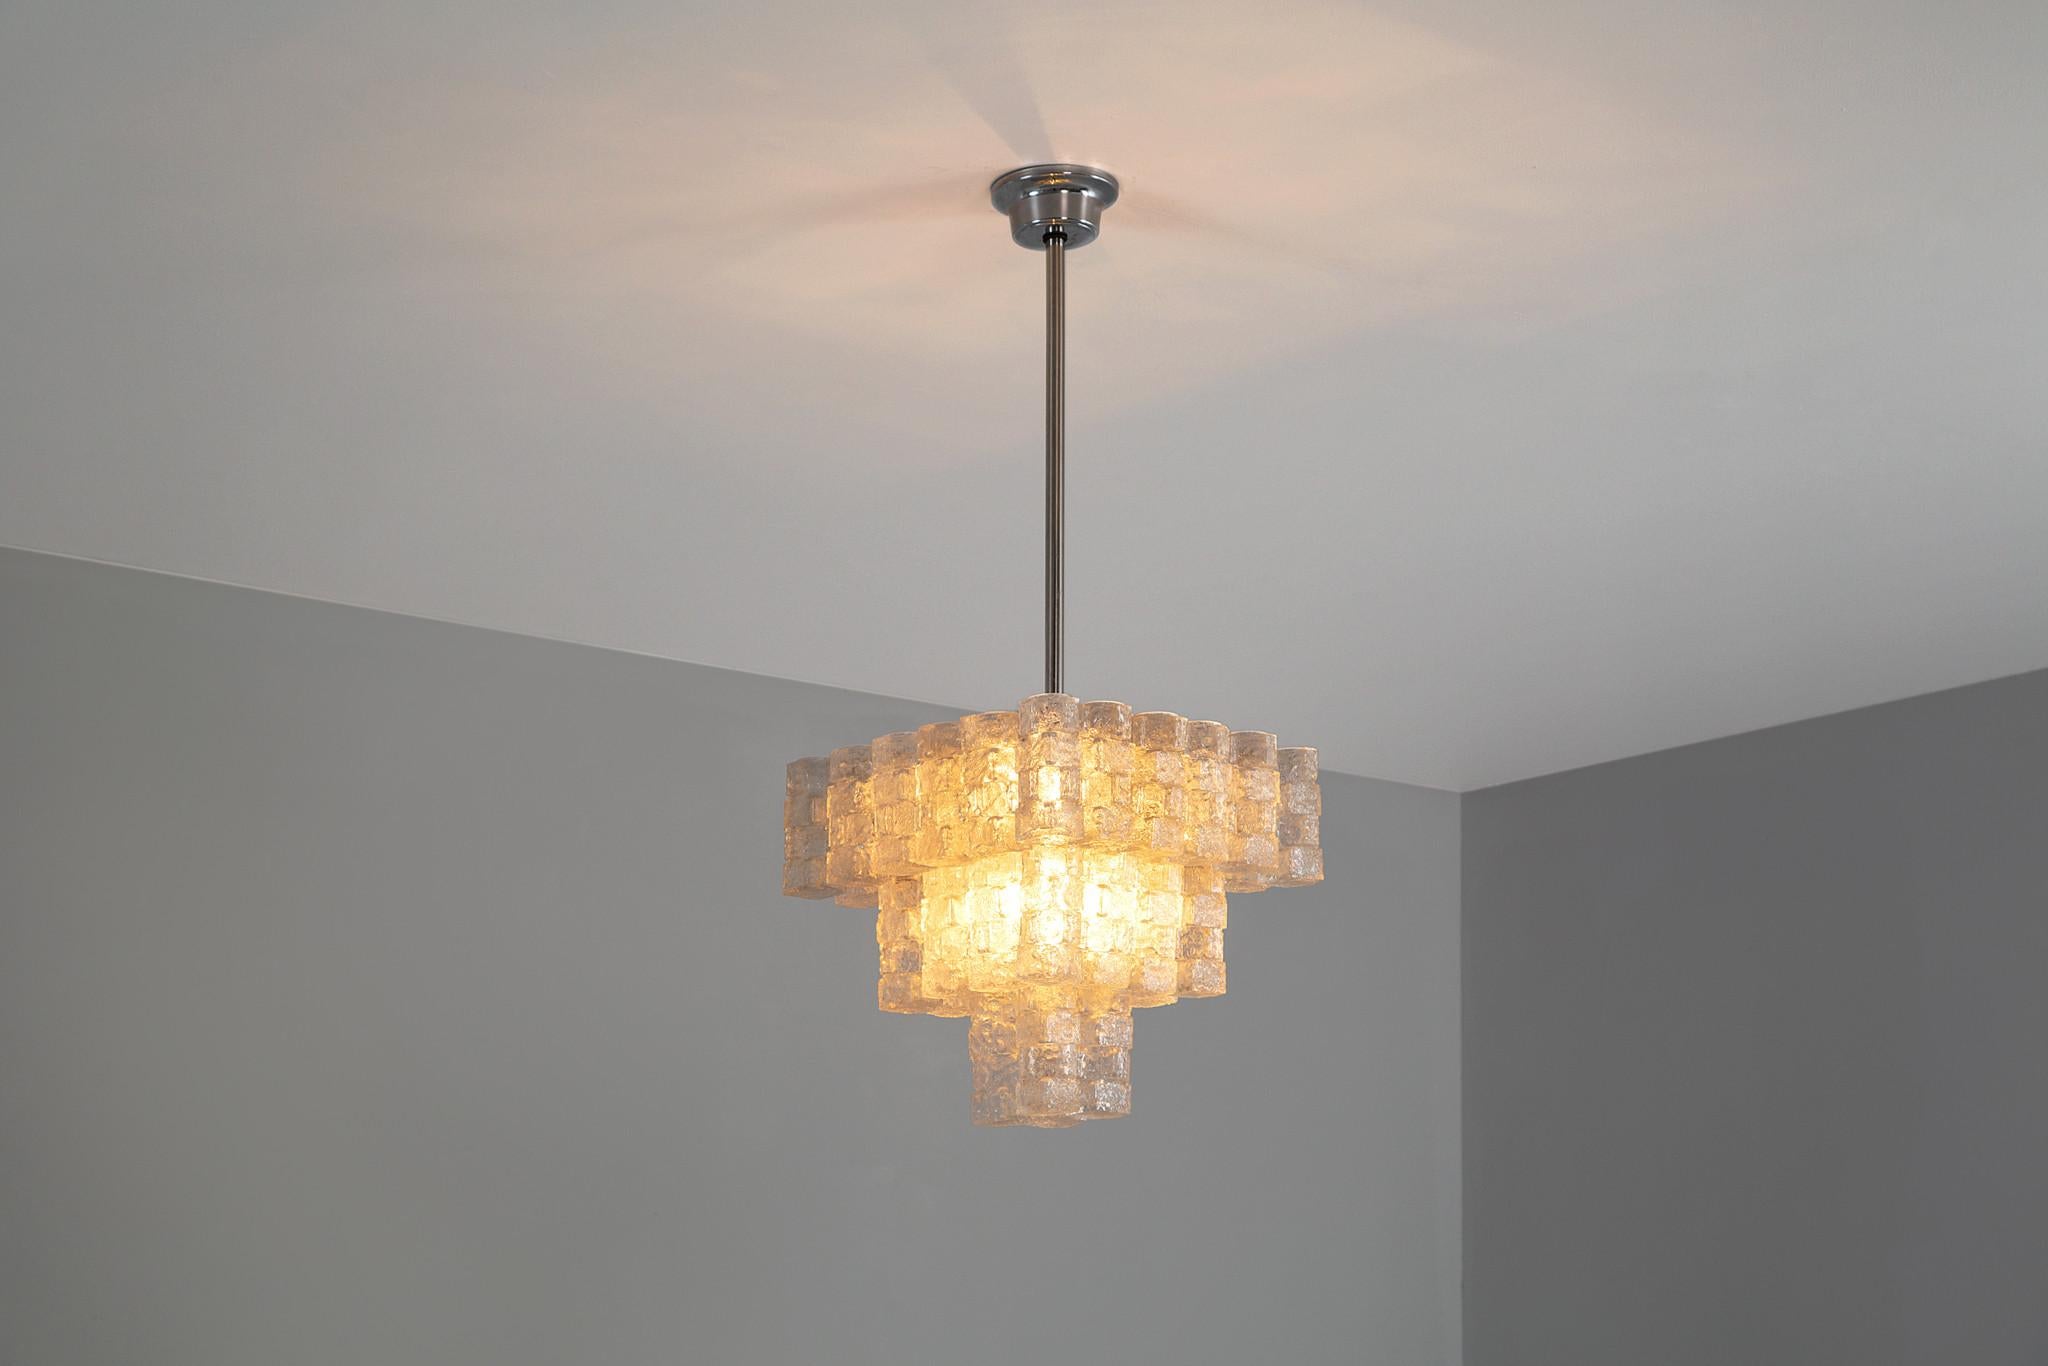 Chandelier, 36 frosted glass cubes, chrome, Italy, 1950s

This charming chandelier is based on a three-level construction arranged in squares. Each layer features rectangular-shaped lampshades that are executed in frosted glass characterized by a